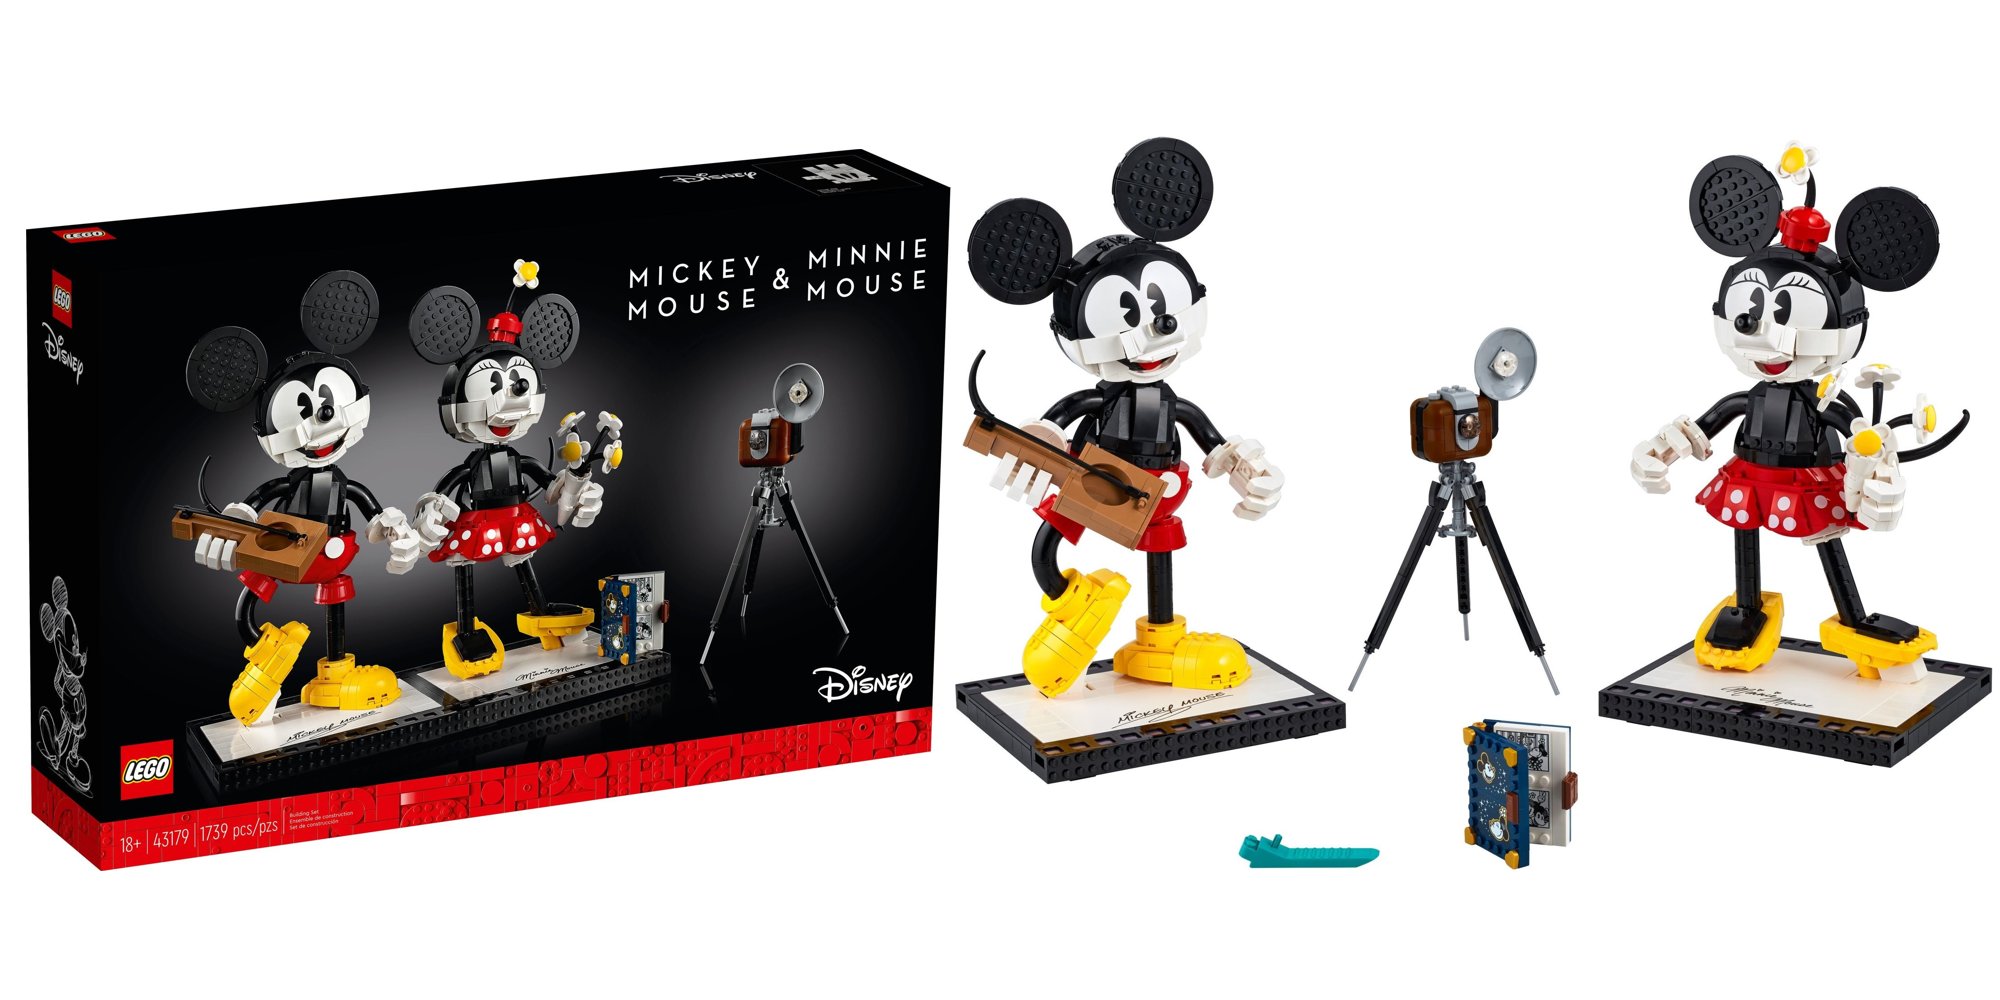 Best LEGO Disney sets - Mickey Mouse and Minnie Mouse